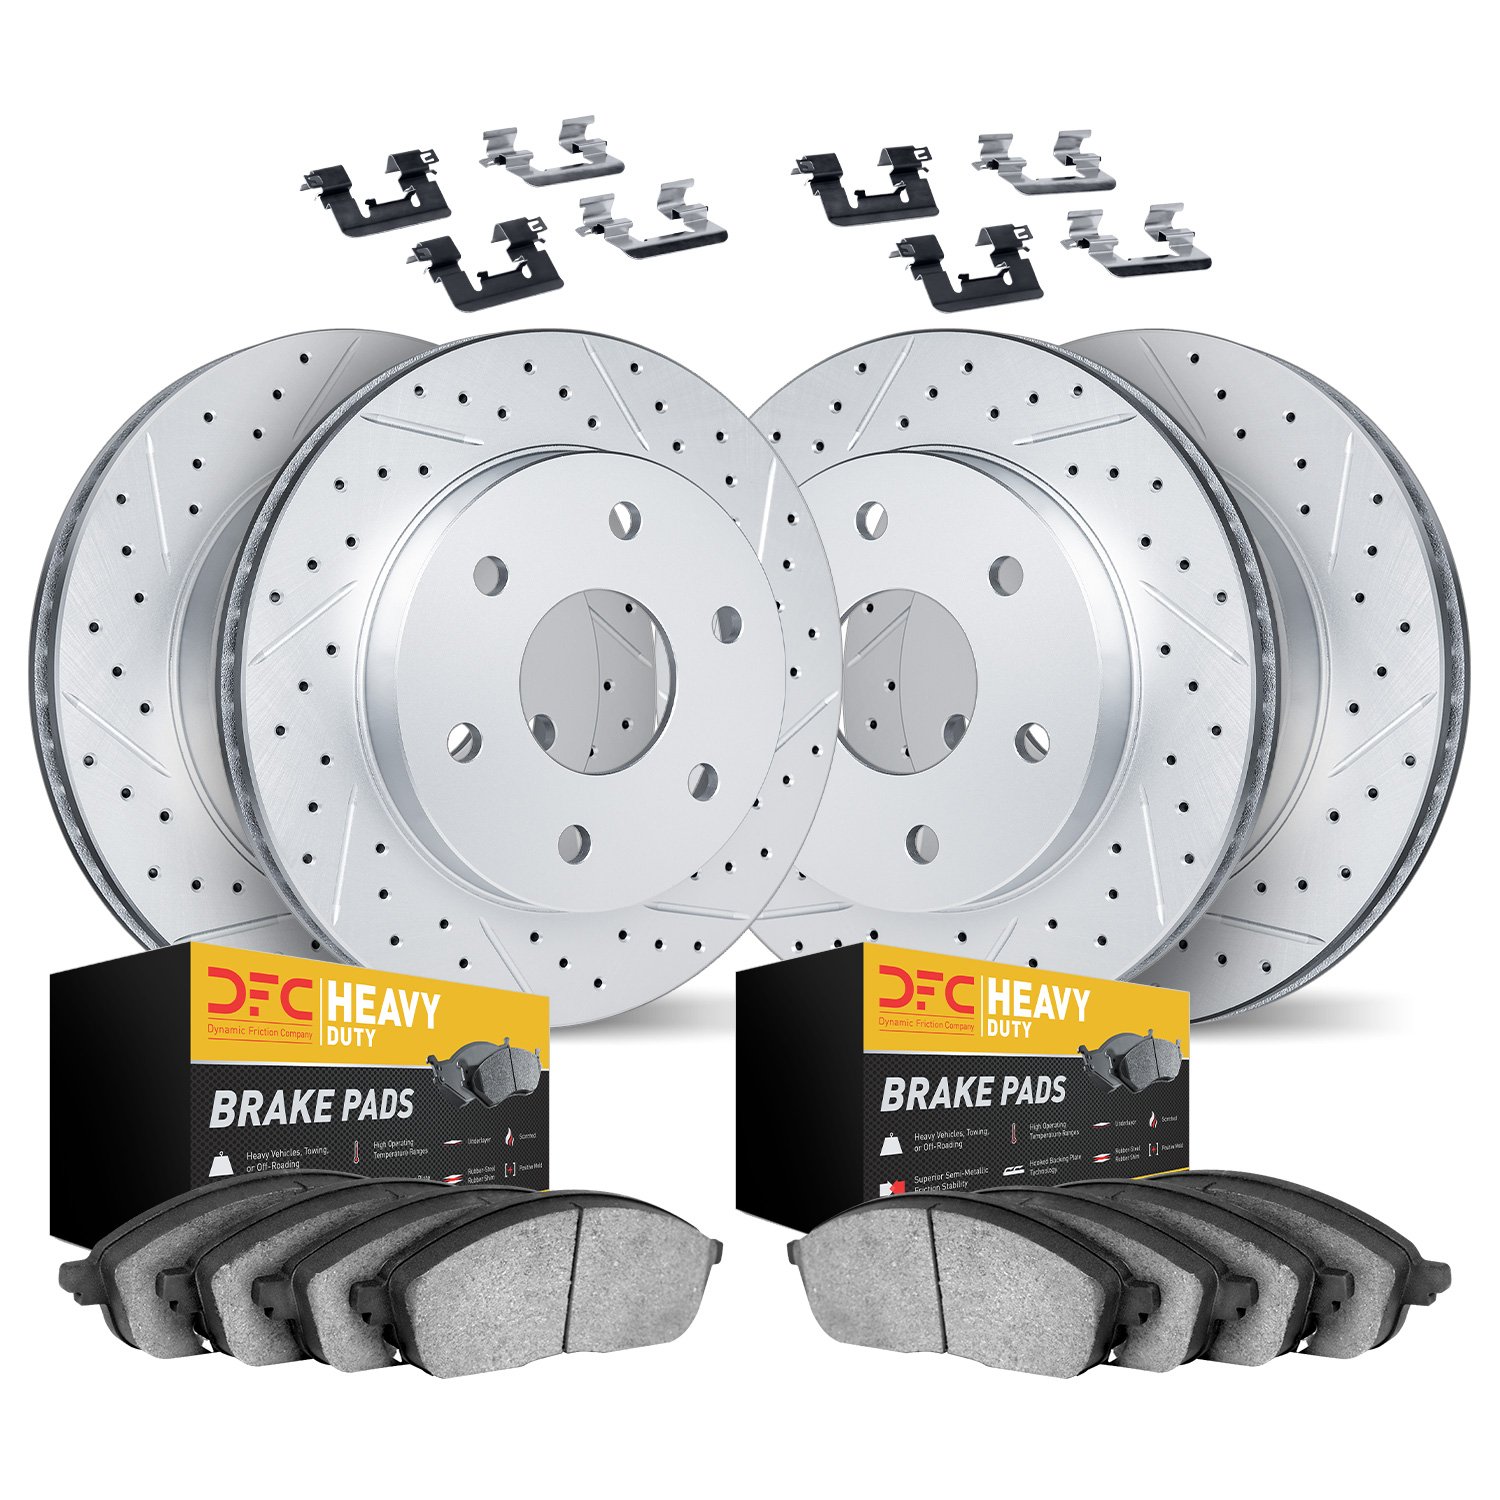 2214-99066 Geoperformance Drilled/Slotted Rotors w/Heavy-Duty Pads Kit & Hardware, 2002-2006 Ford/Lincoln/Mercury/Mazda, Positio